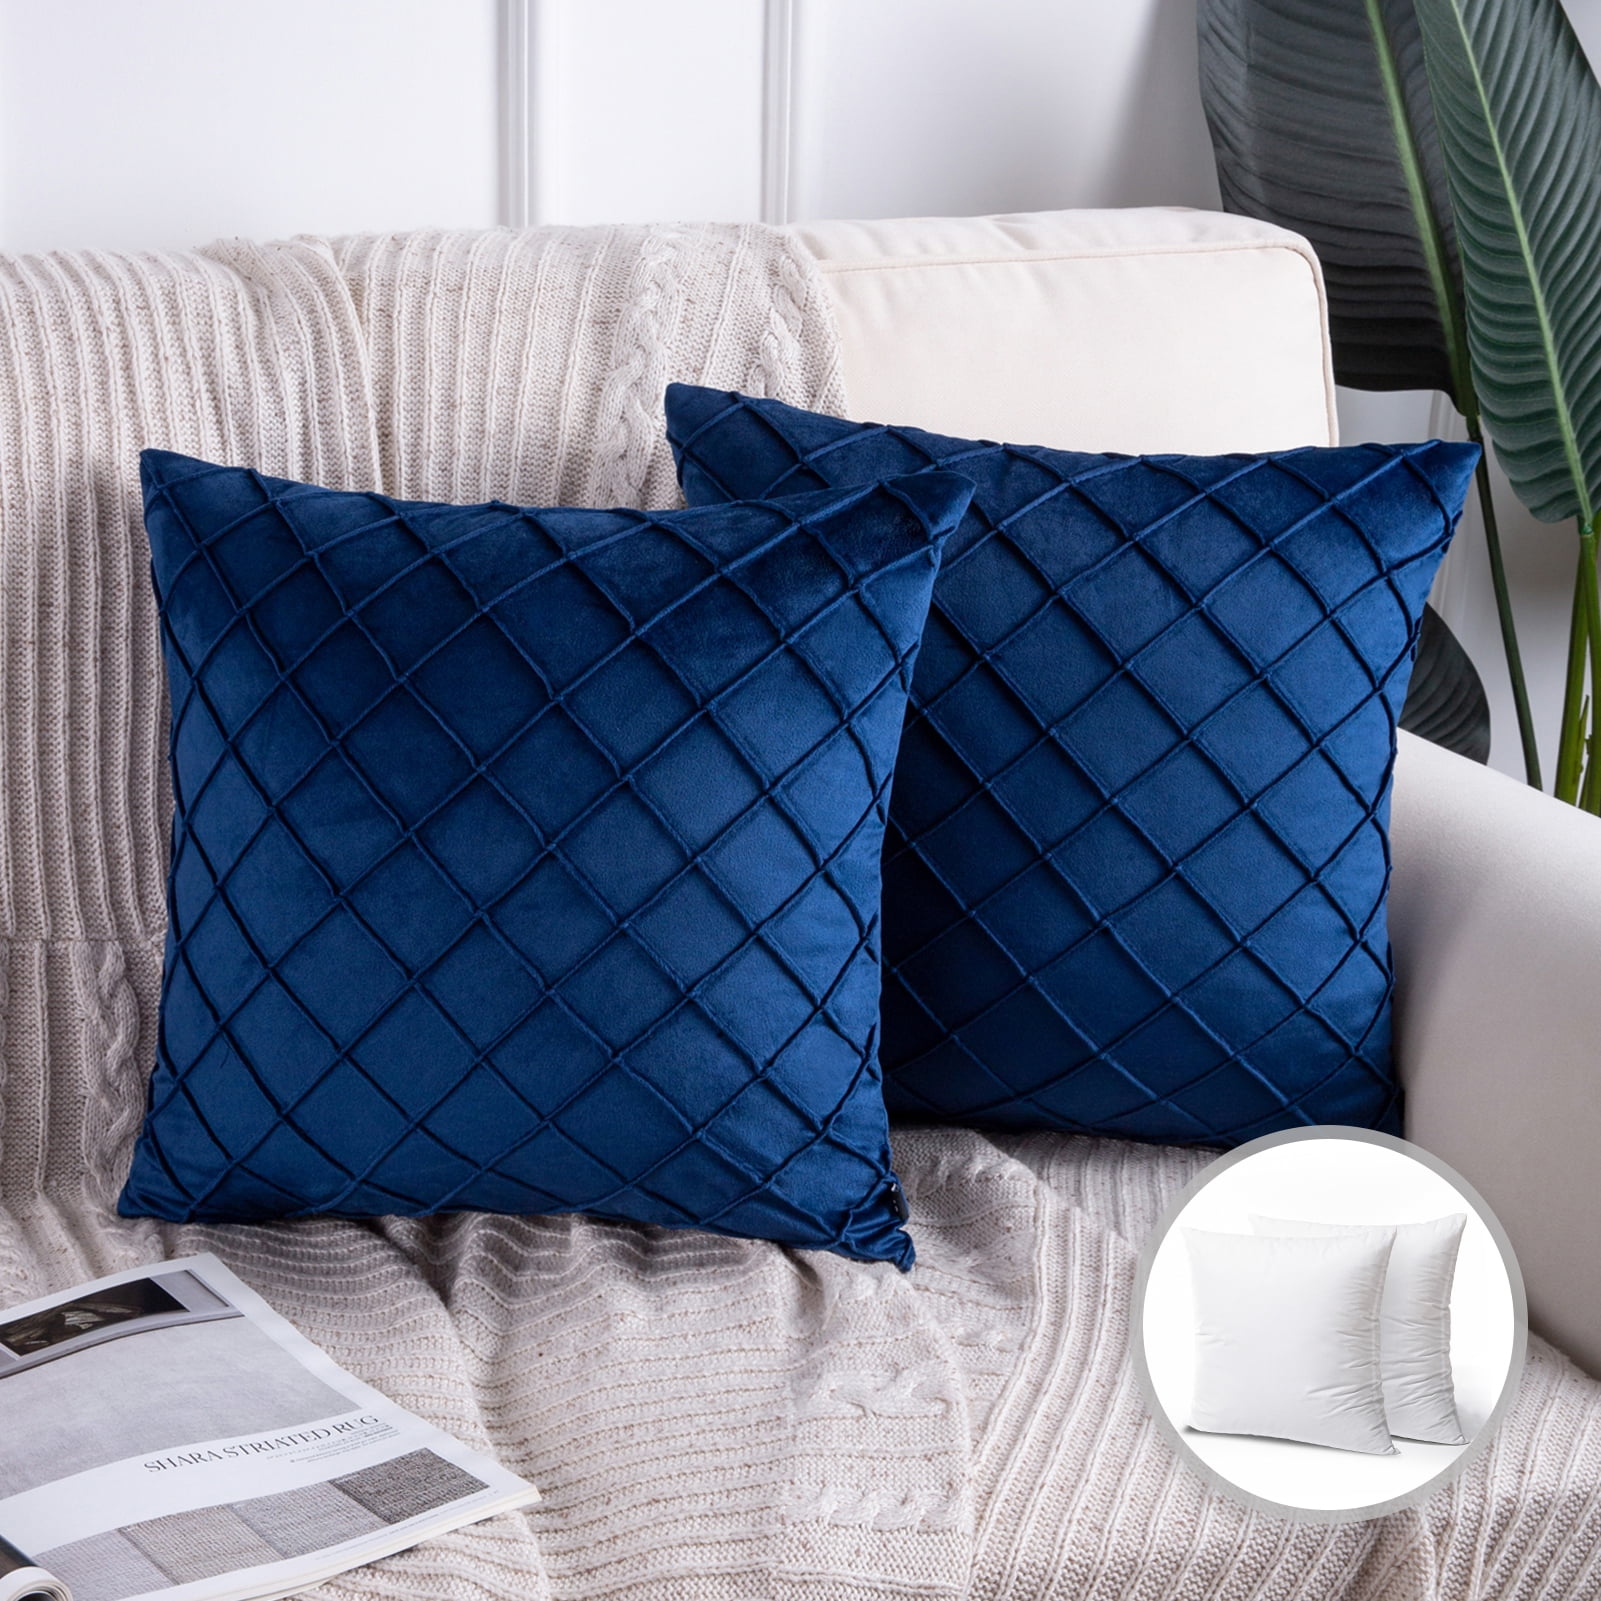 Phantoscope Soft Pleated Velvet Series Decorative Throw Pillow, 18 inch x 18 inch, Navy Blue, 2 Pack, Size: 18 x 18